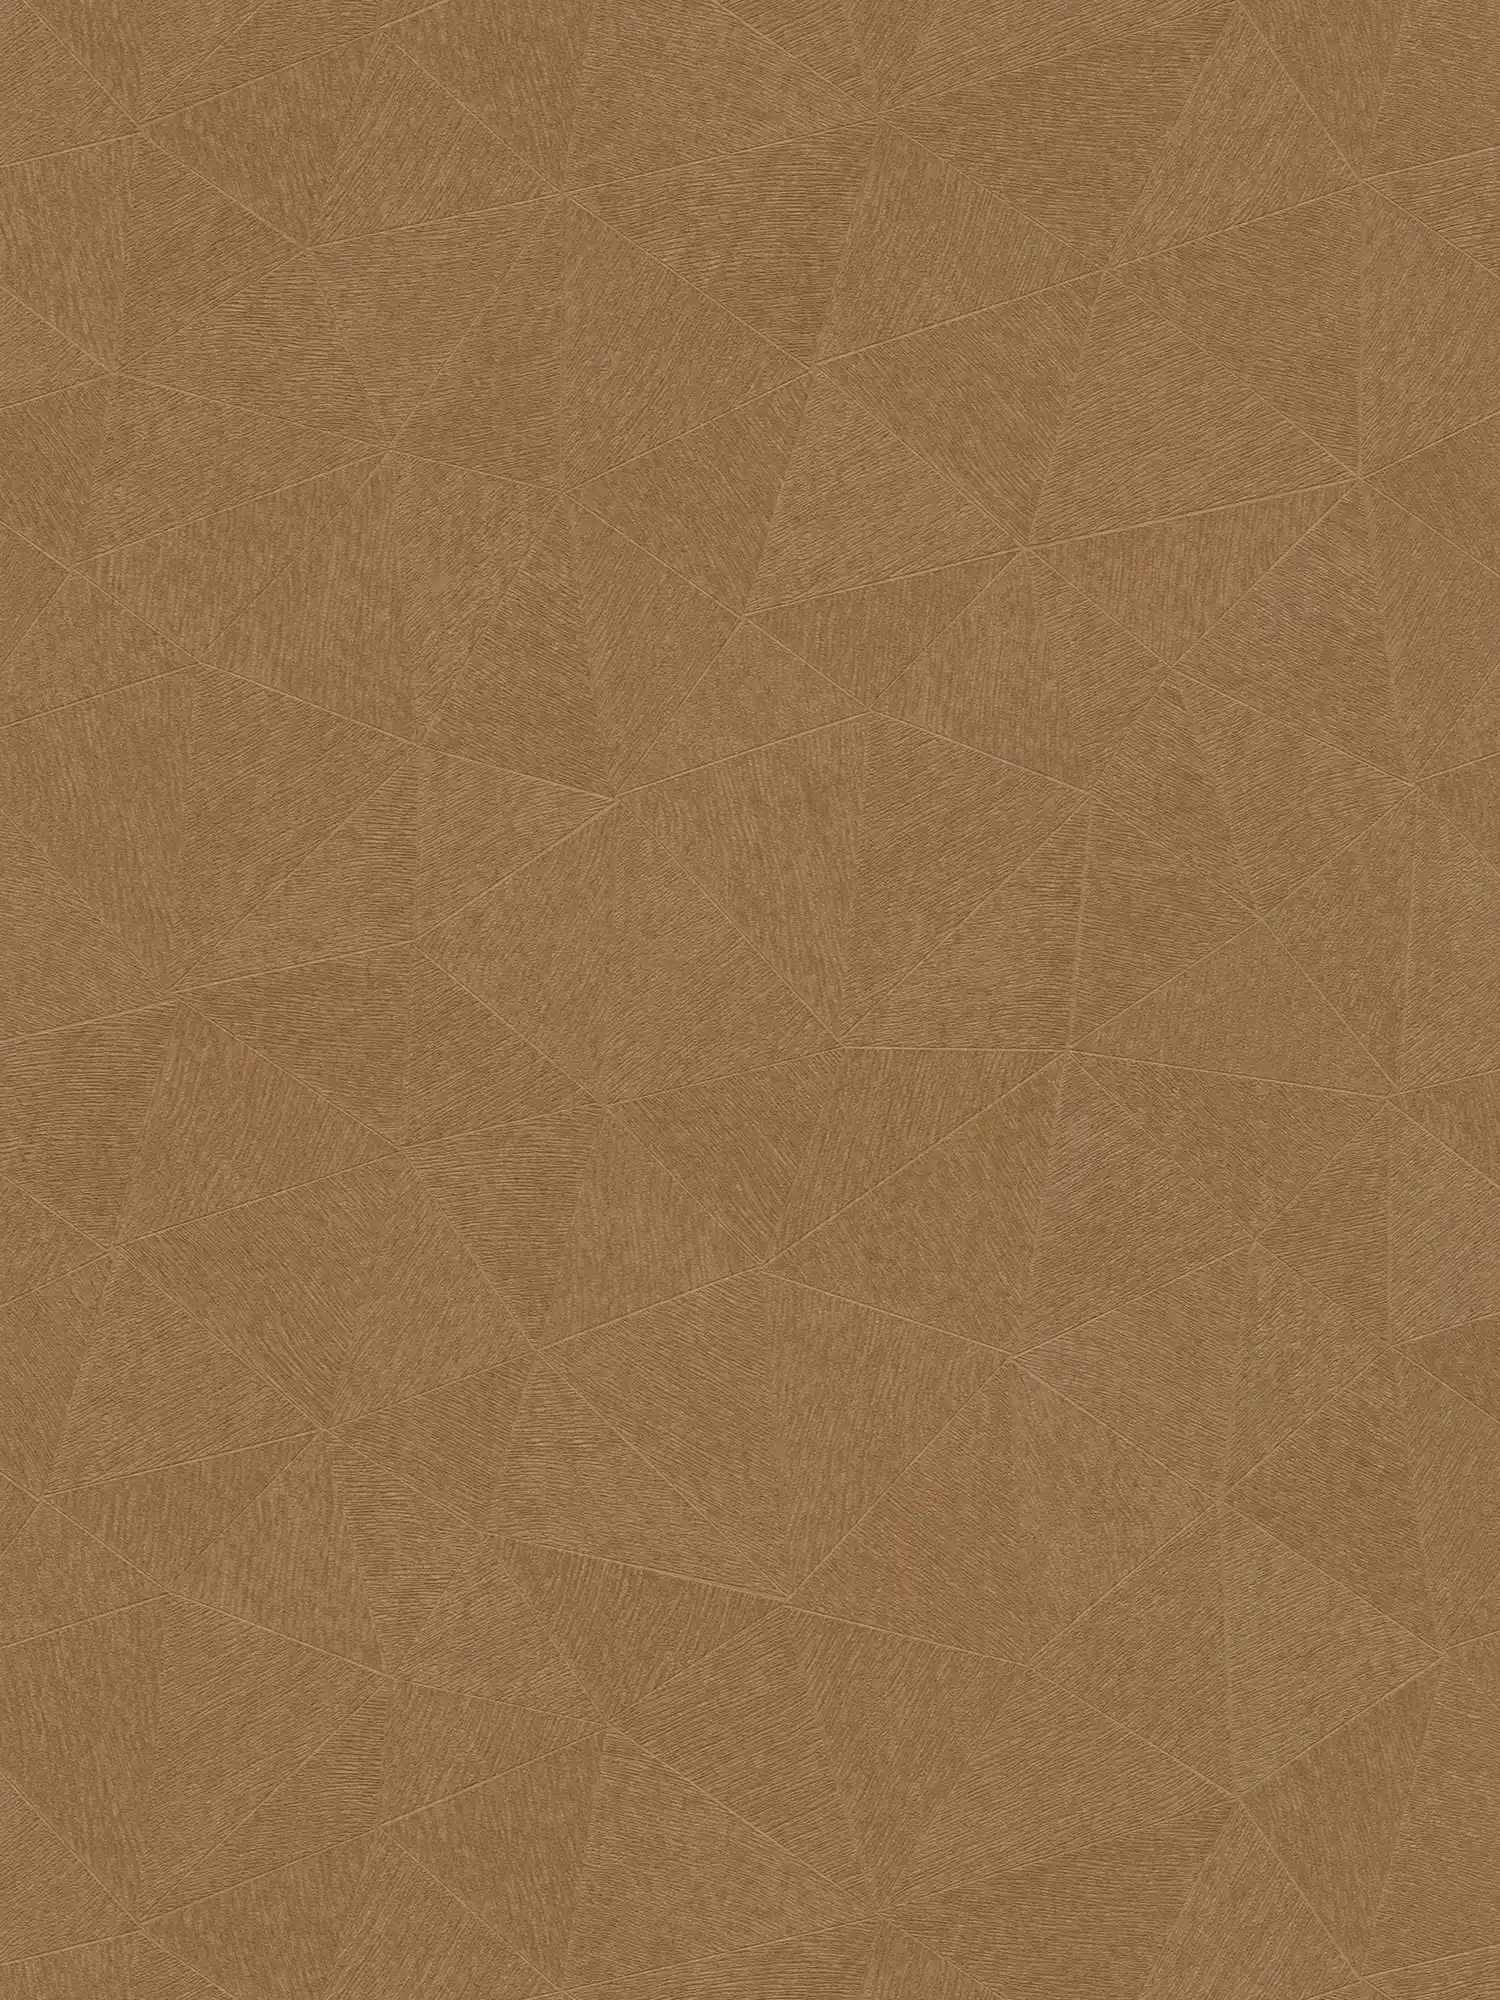 Non-woven wallpaper with discreet triangle pattern - brown
